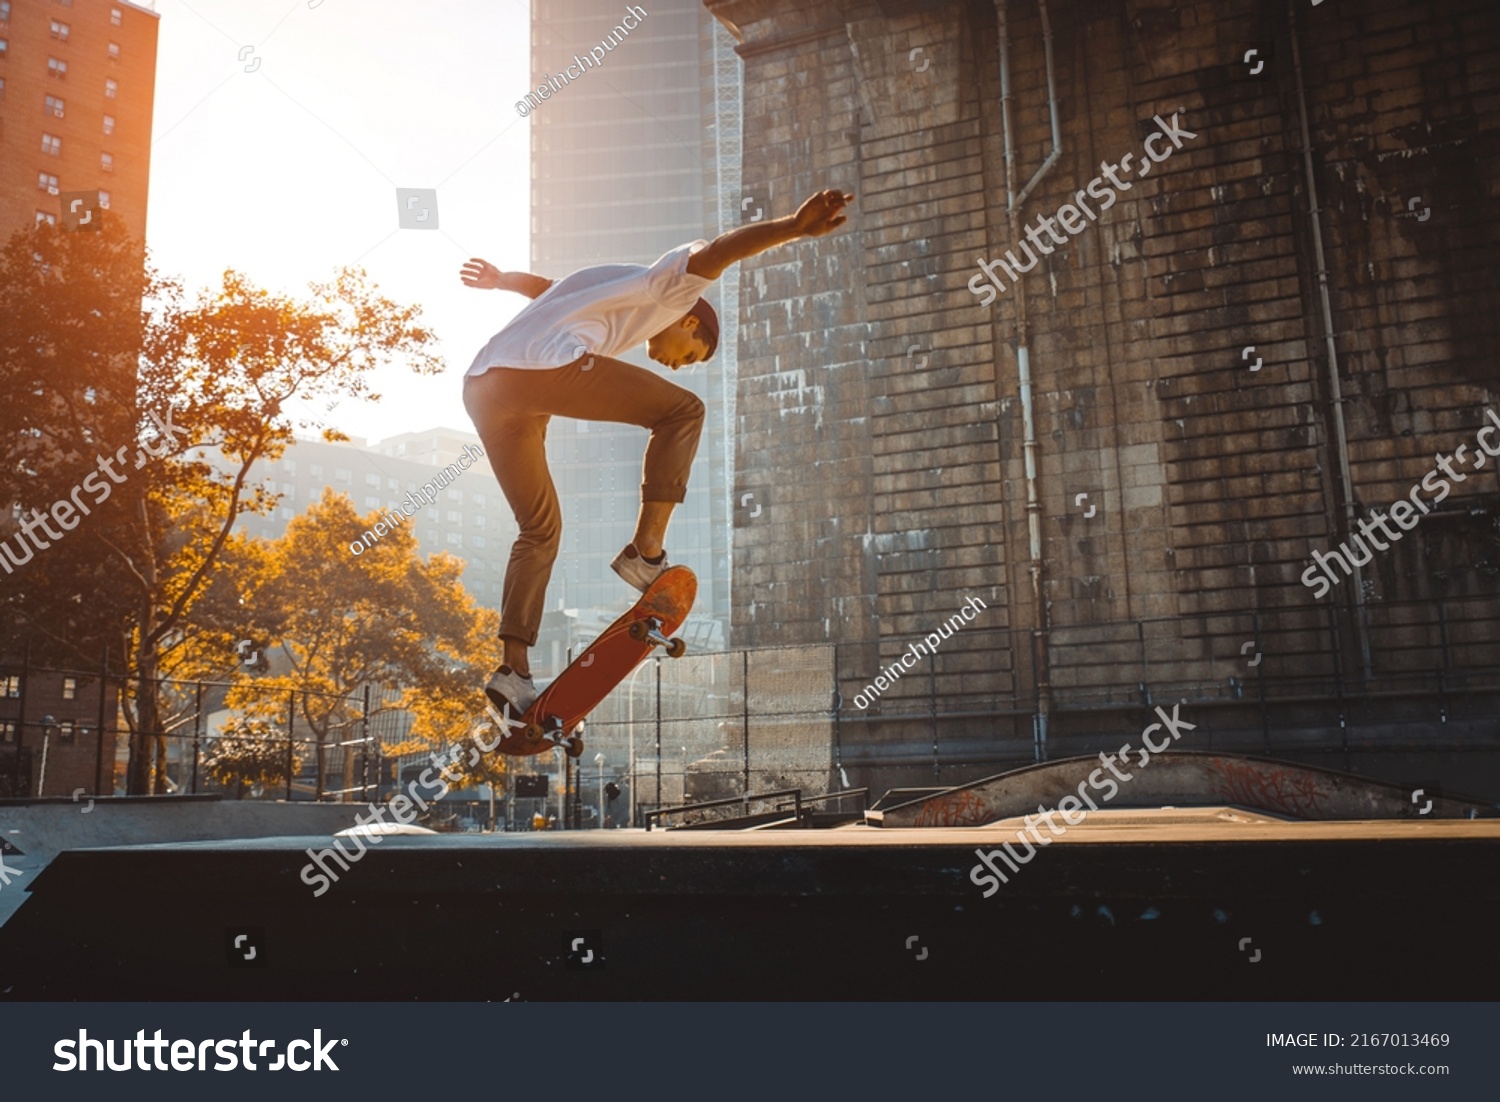 Young adult skating outdoors - Stylish skateboarder boy training in a nNew York skate park, concepts about sport and ifestyle #2167013469